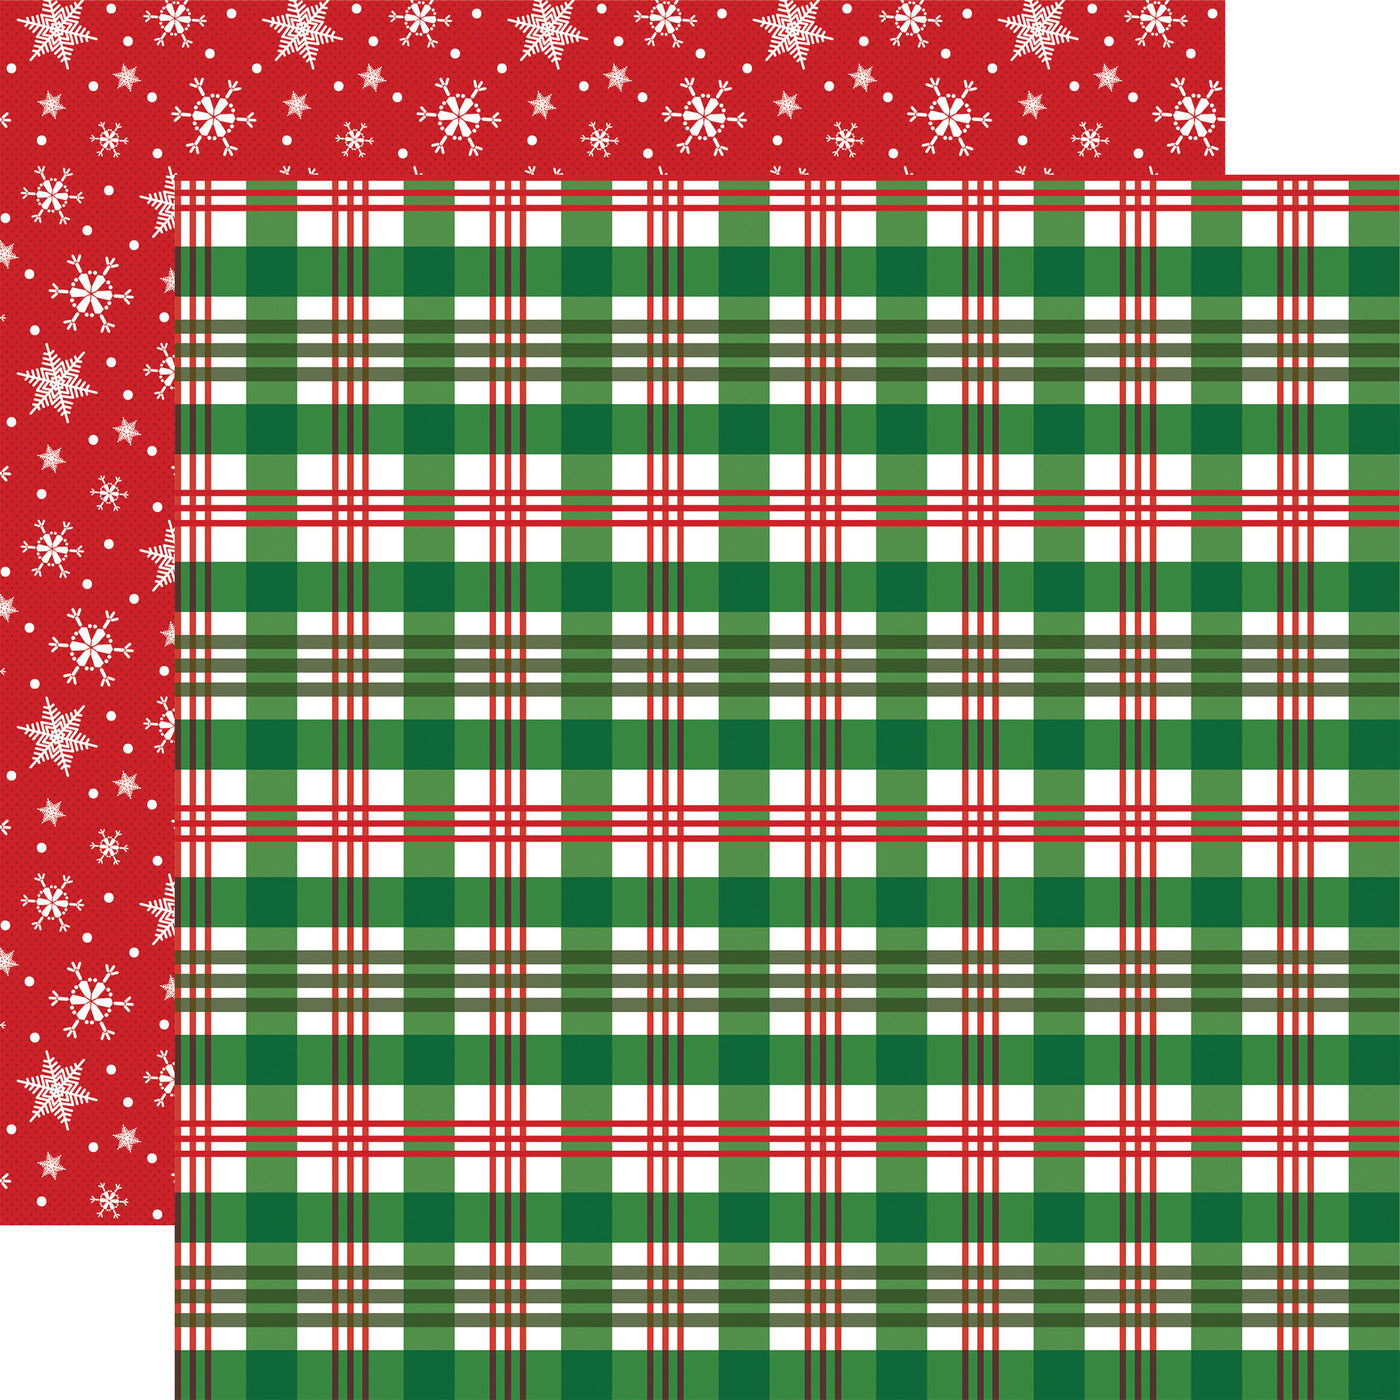 Double-sided 12x12 cardstock with red and green plaid; the reverse is white snowflakes on a red background.